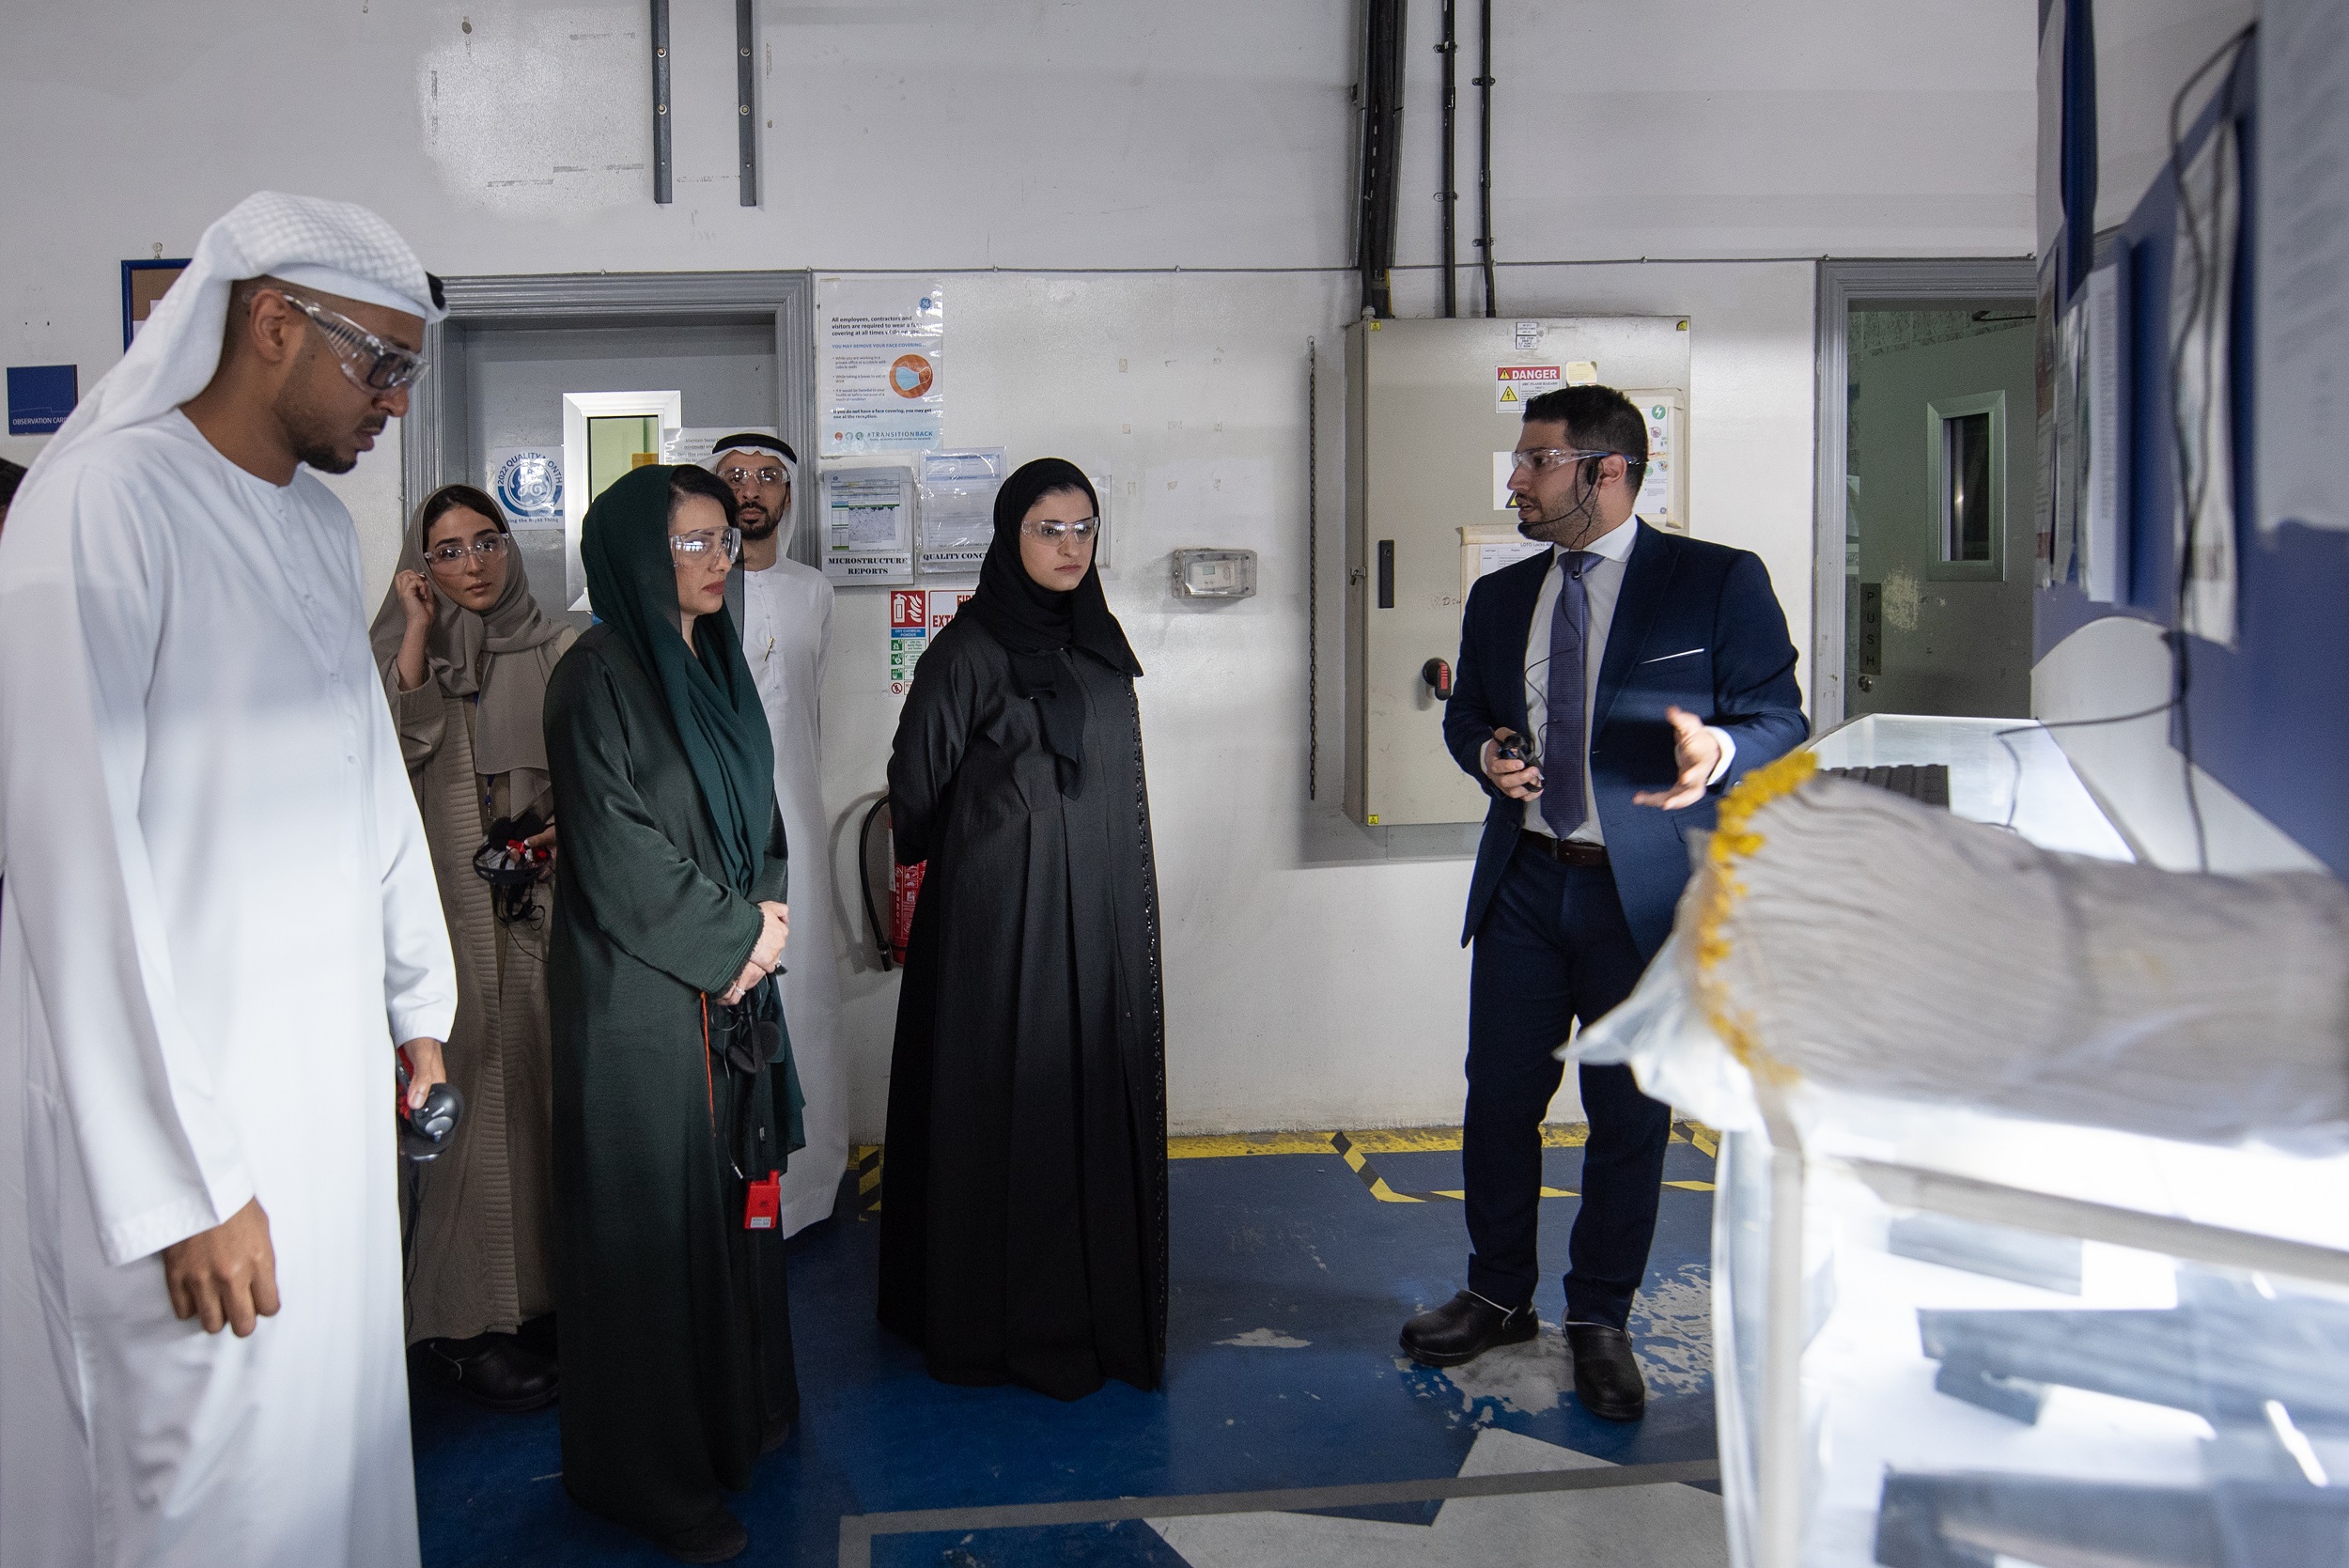 UAE Minister of State for Public Education and Advanced Technology visits GE in Dubai to discuss future of energy, healthcare and aviation